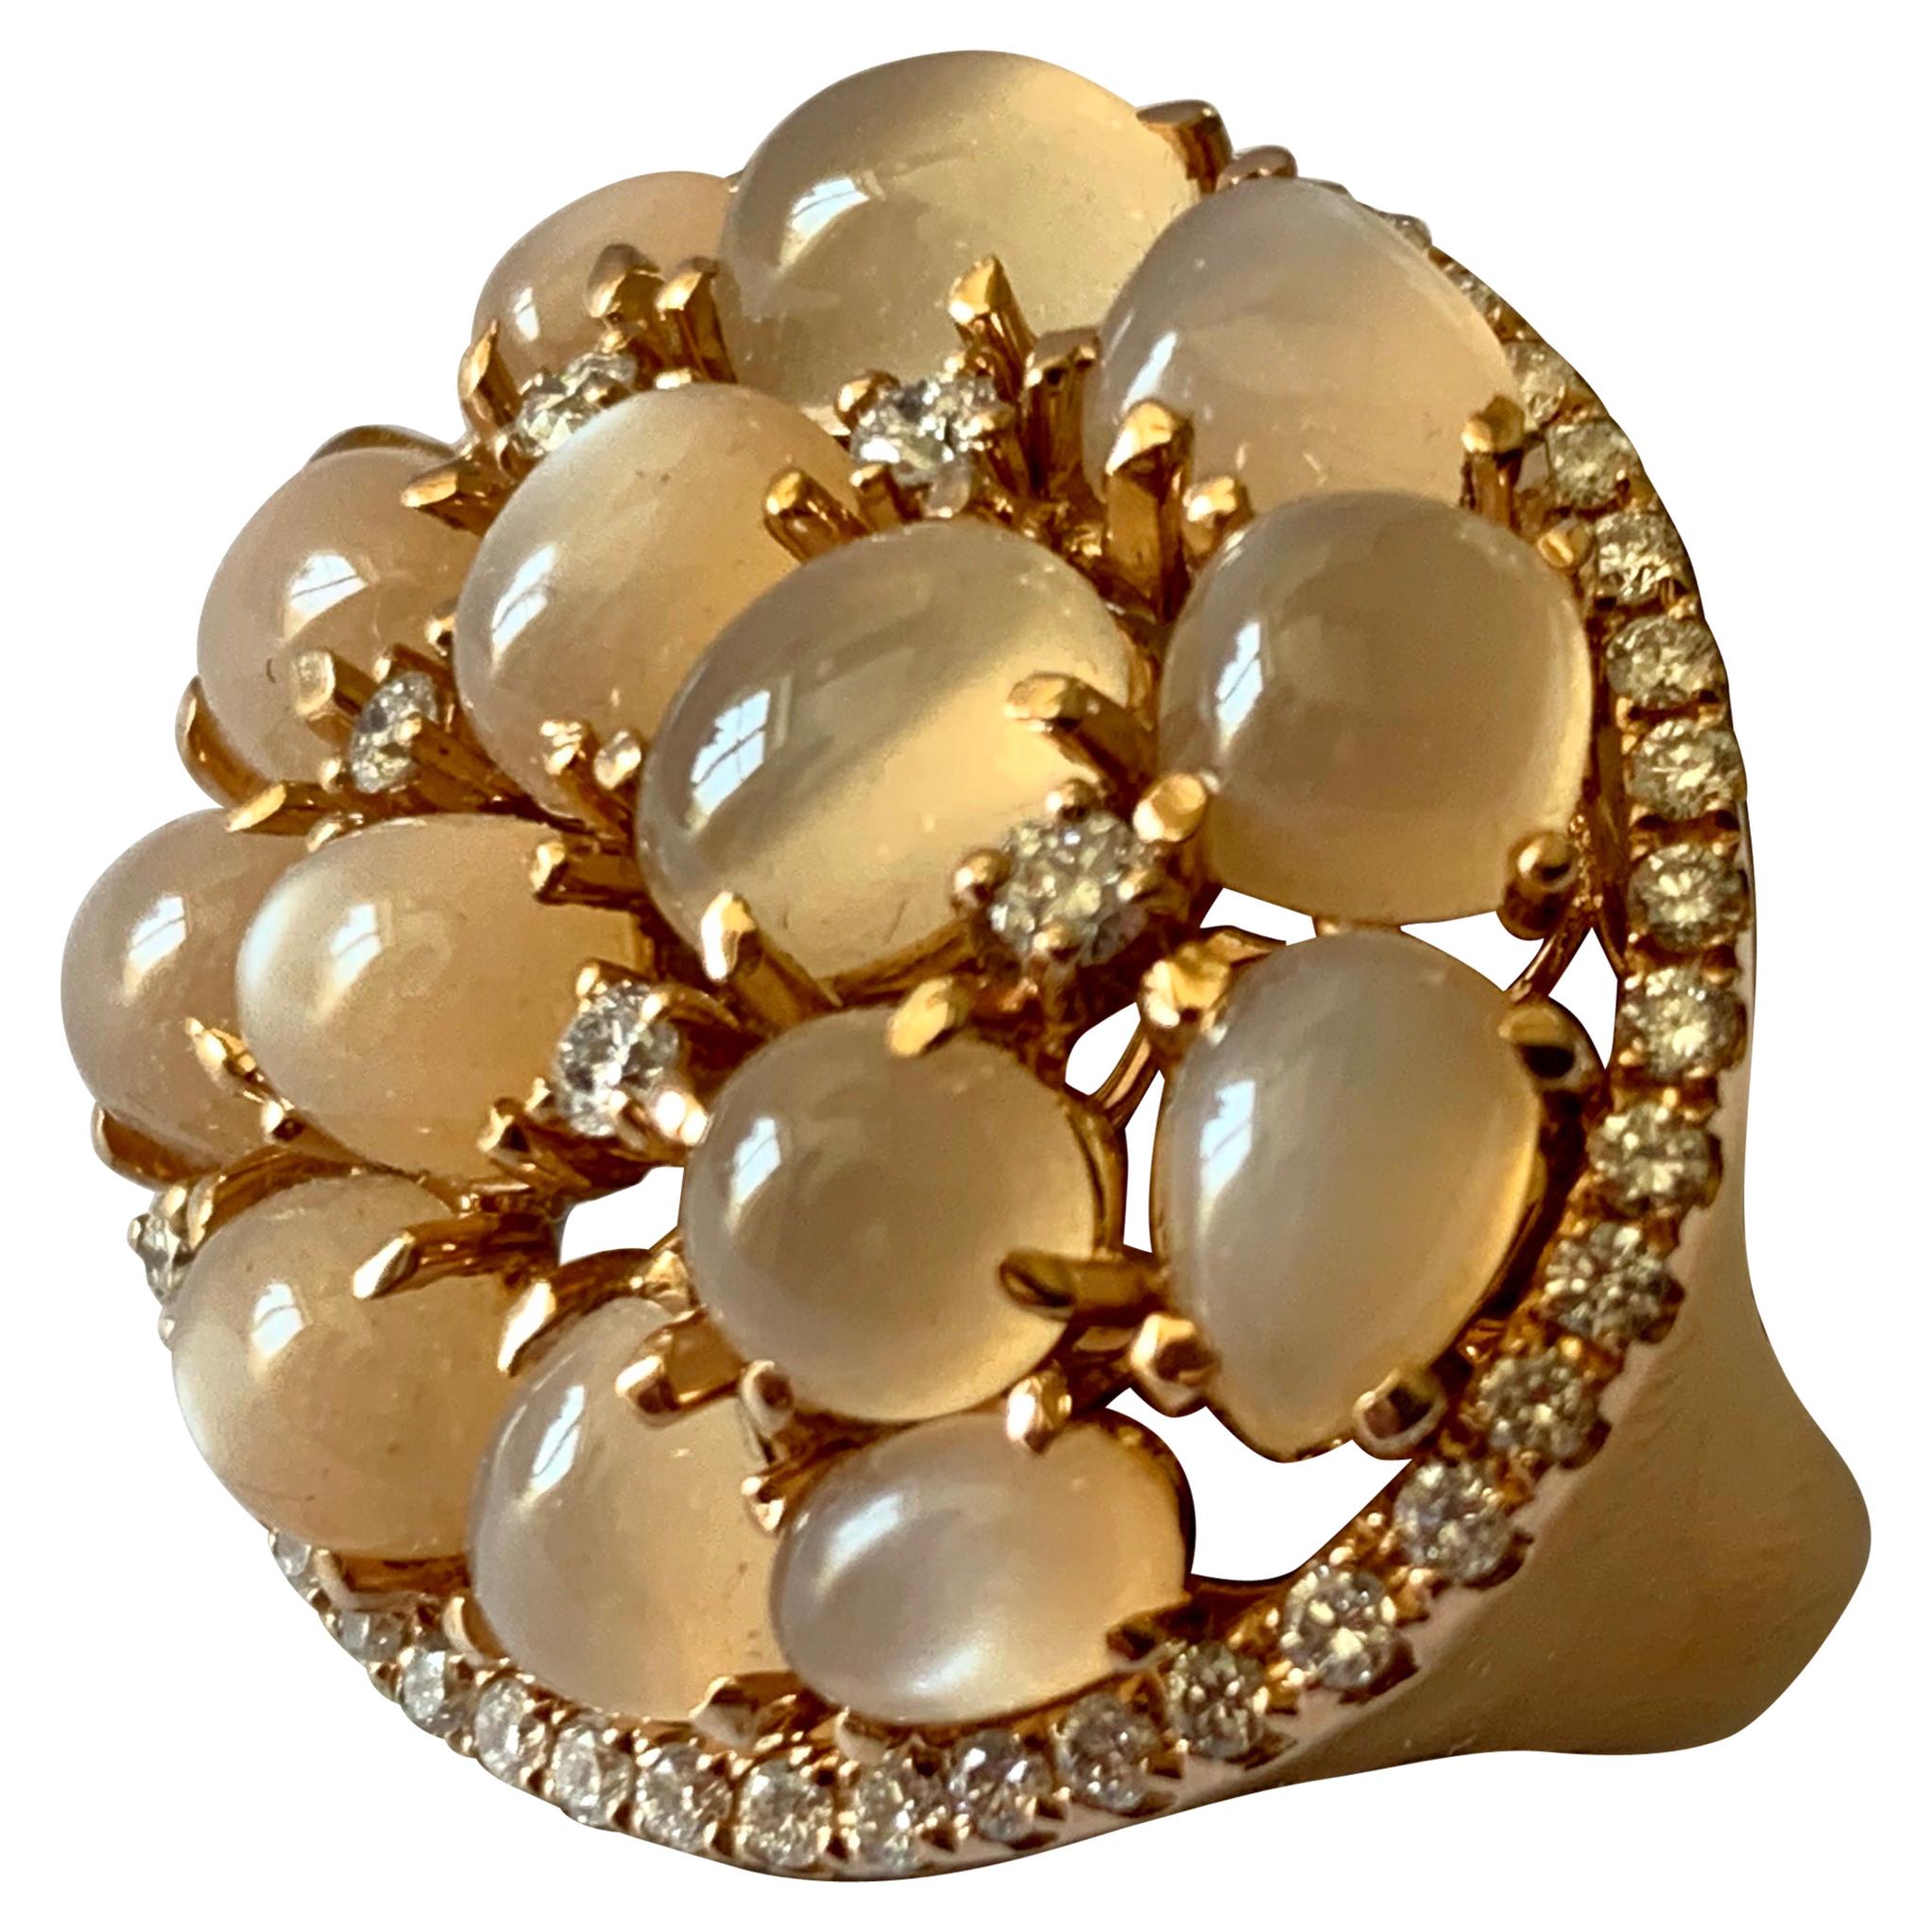 Extravagant 18 Karat Rose Gold Cocktail Ring with Moonstones and Diamonds